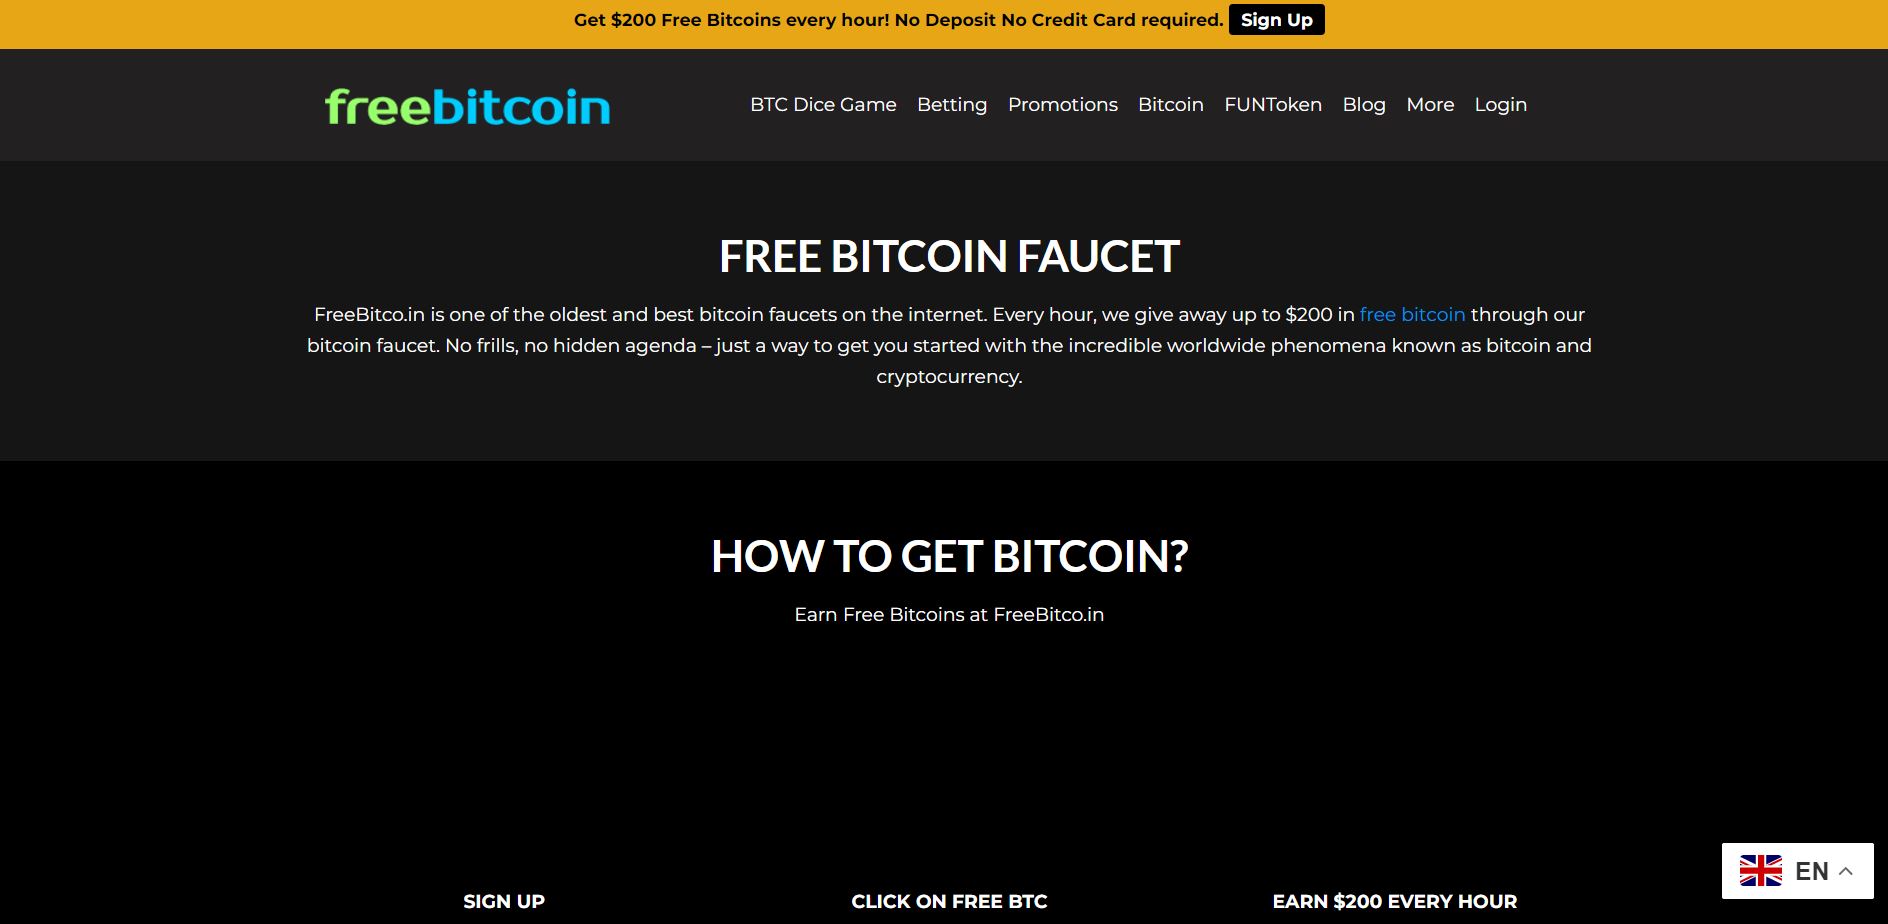 Top 8 Finest Bitcoin Faucets That Will Be Industry Leaders In 